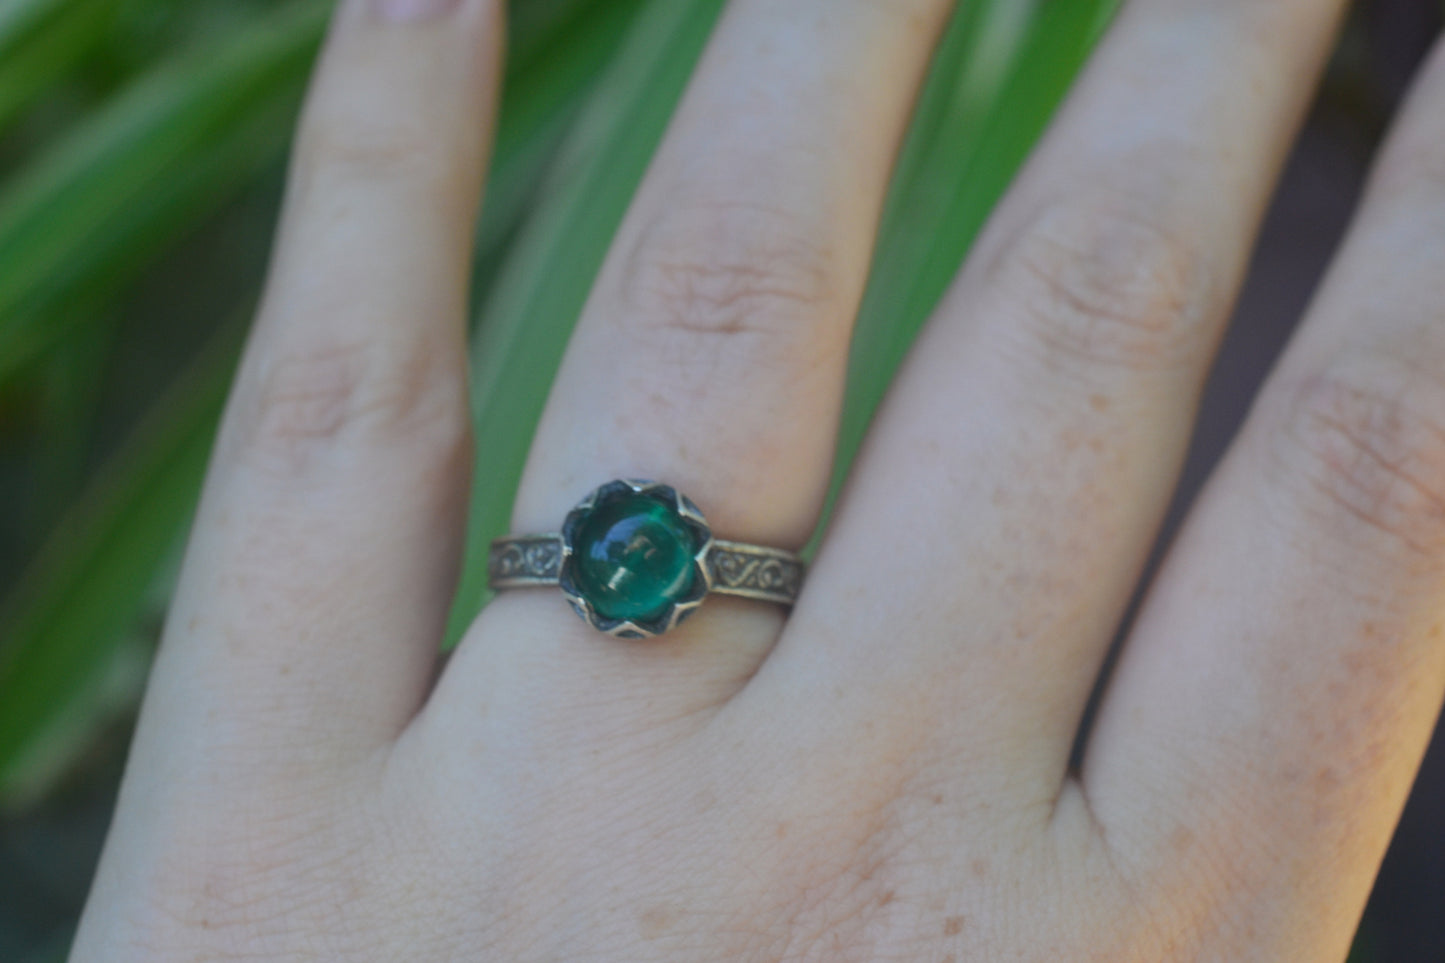 8mm Round Emerald Cabochon Ring in Silver